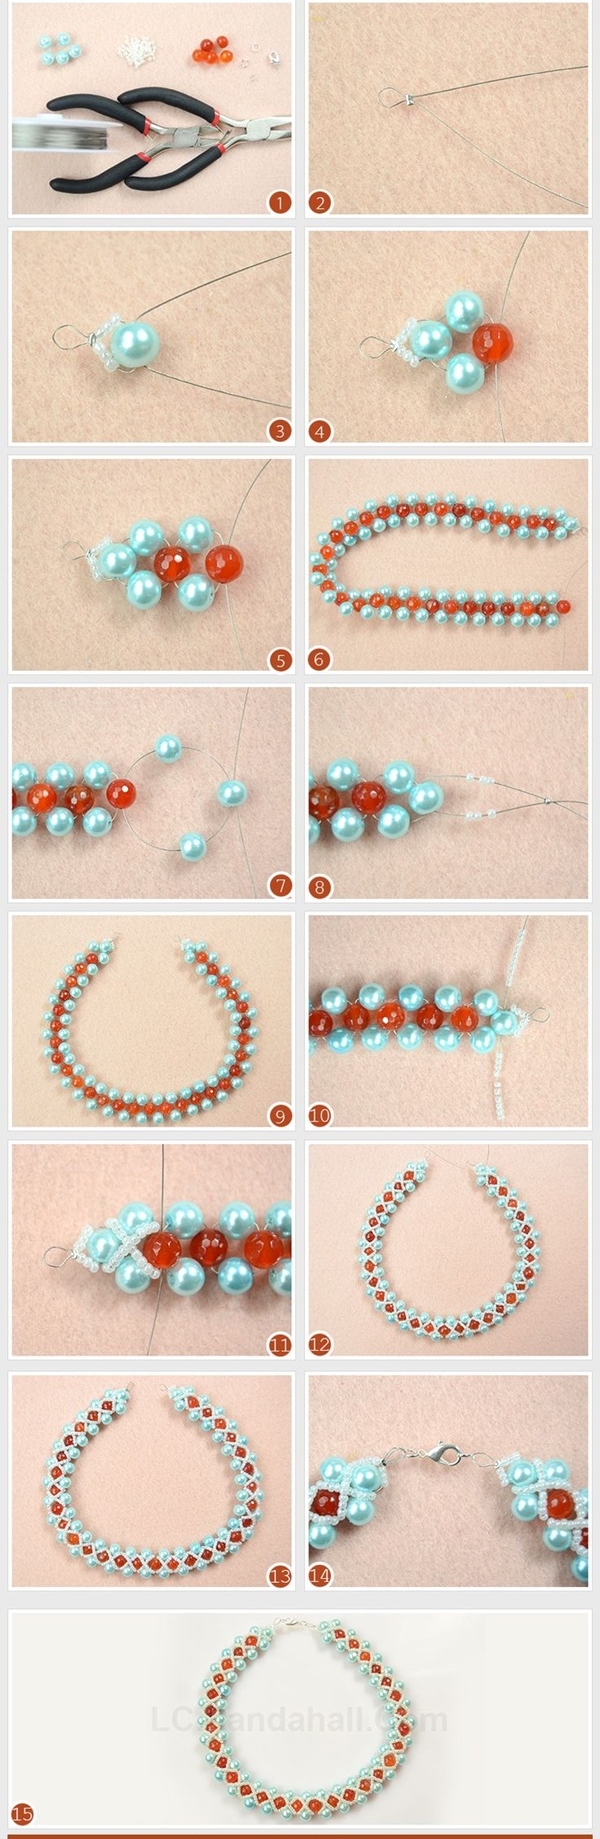 Addictive weaving Tutorials to try this summer (28)